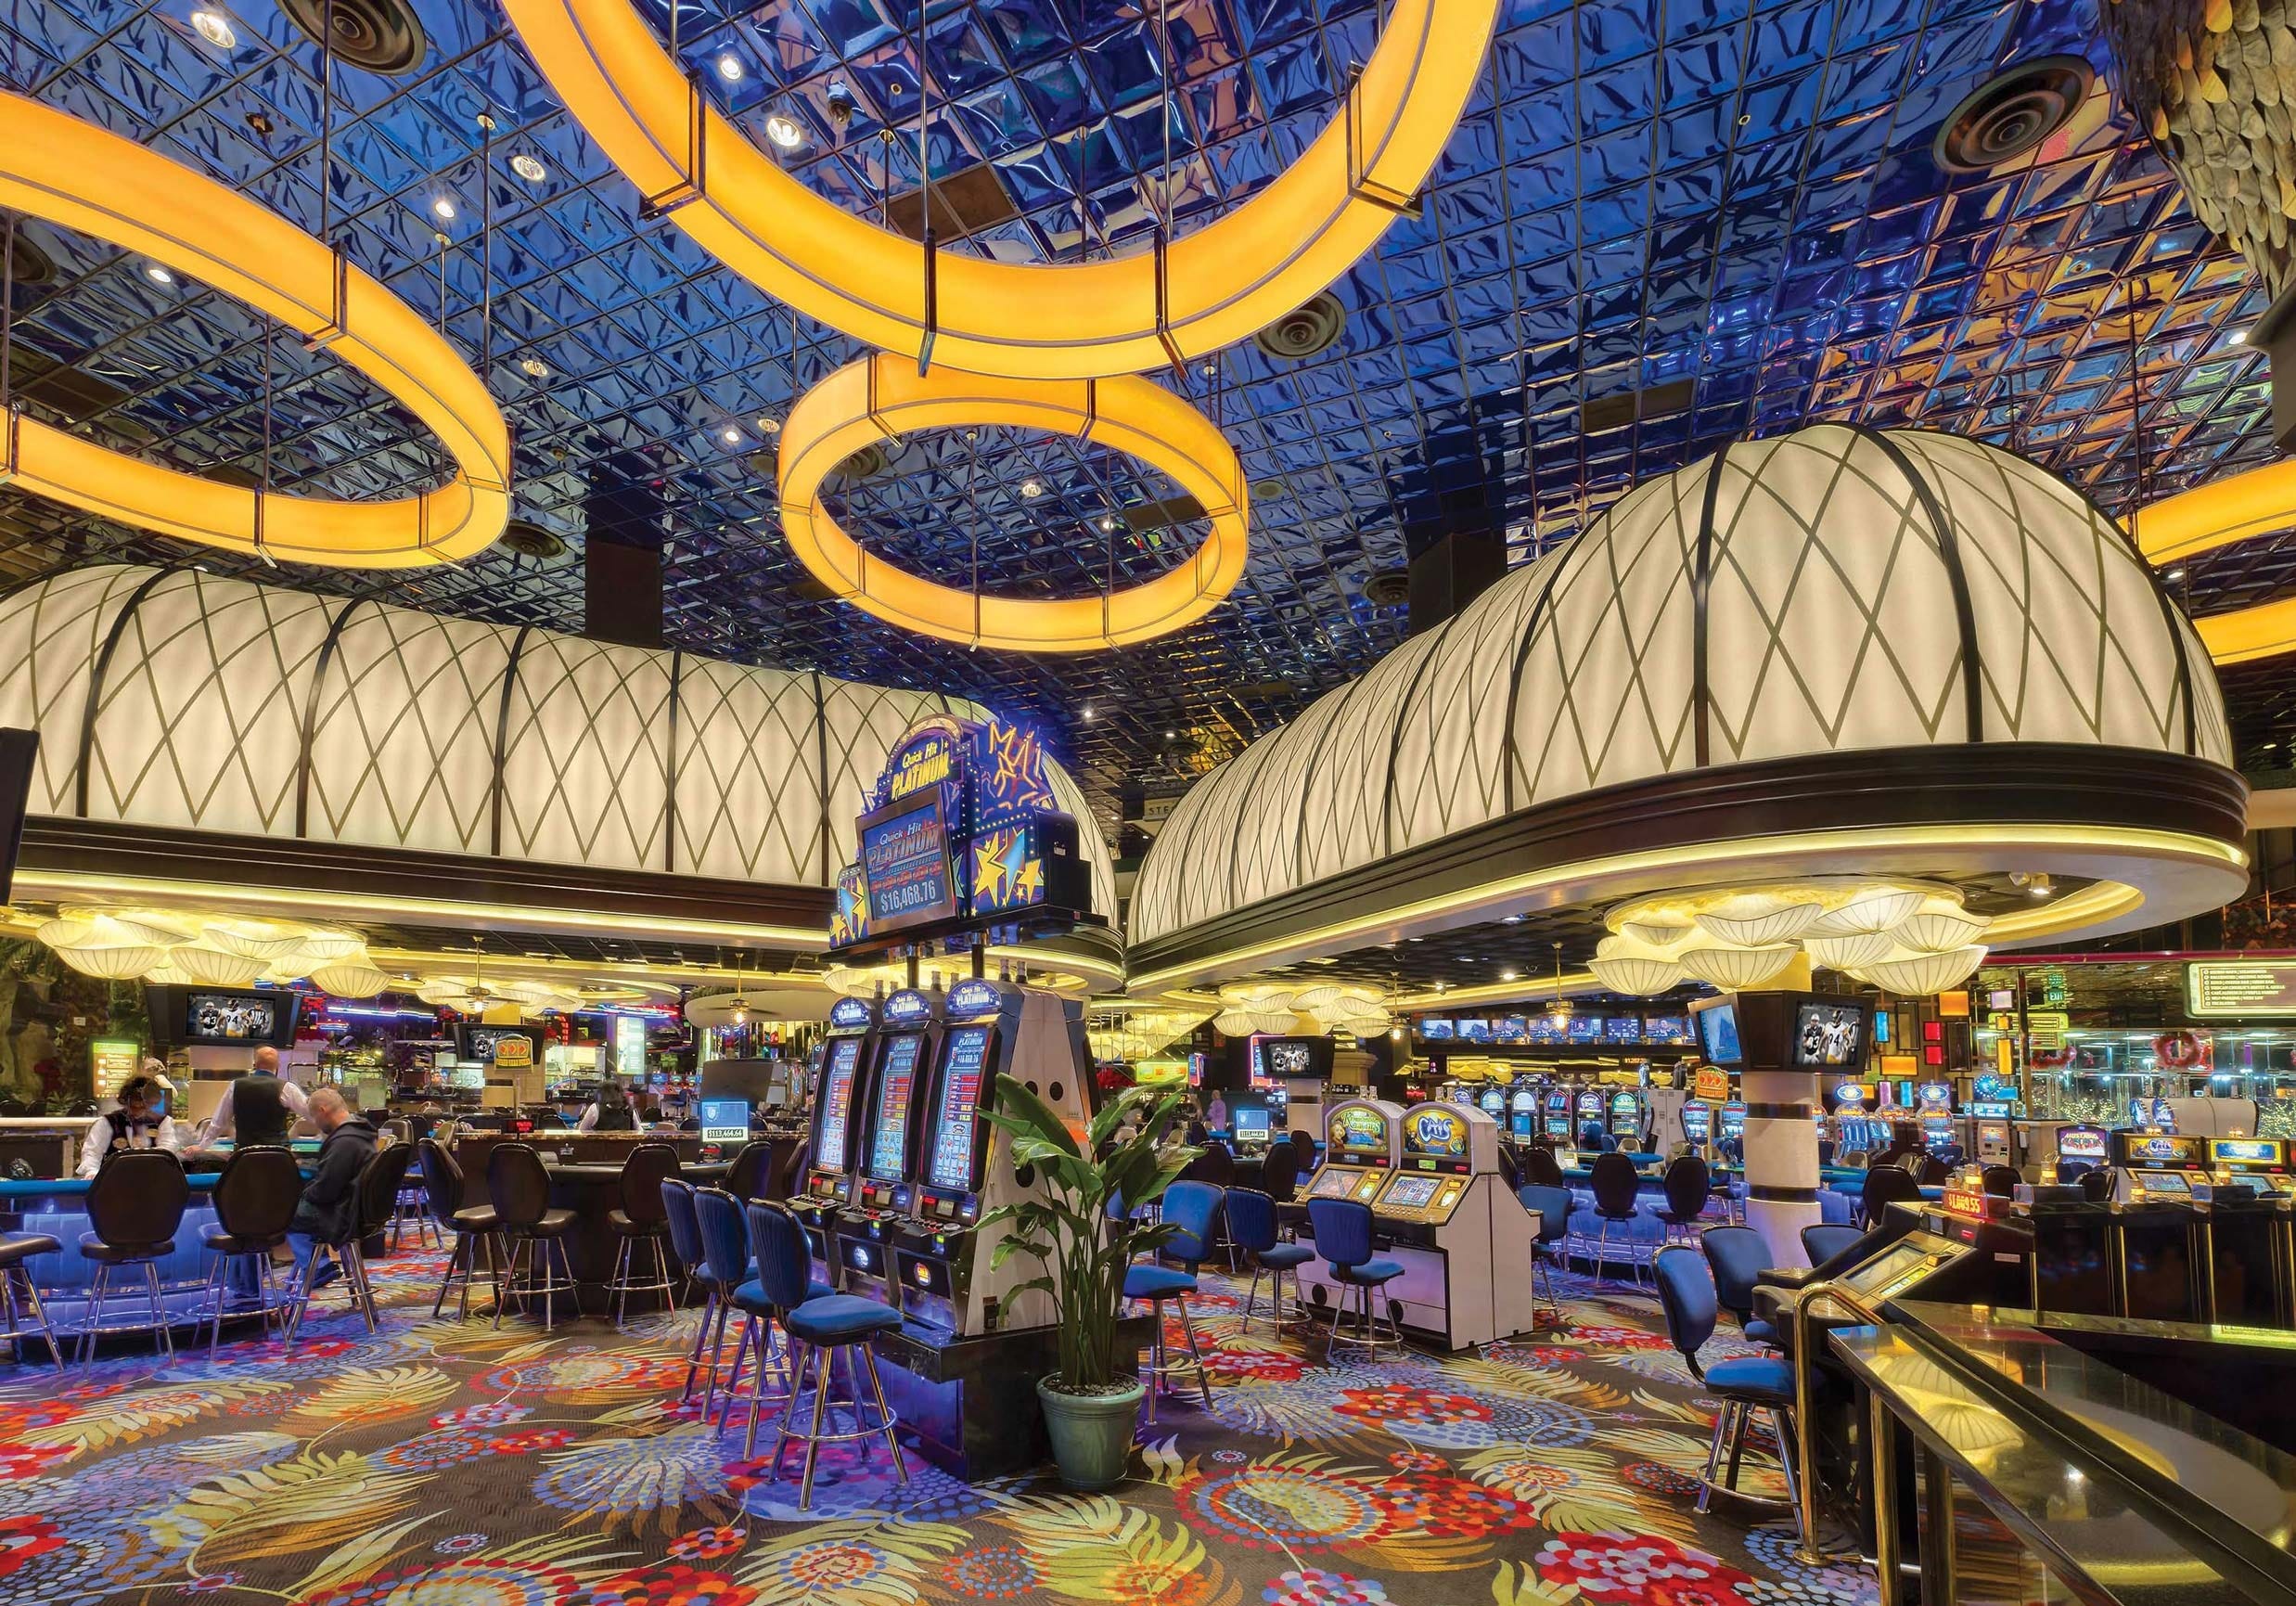 18 and over casinos near palm springs